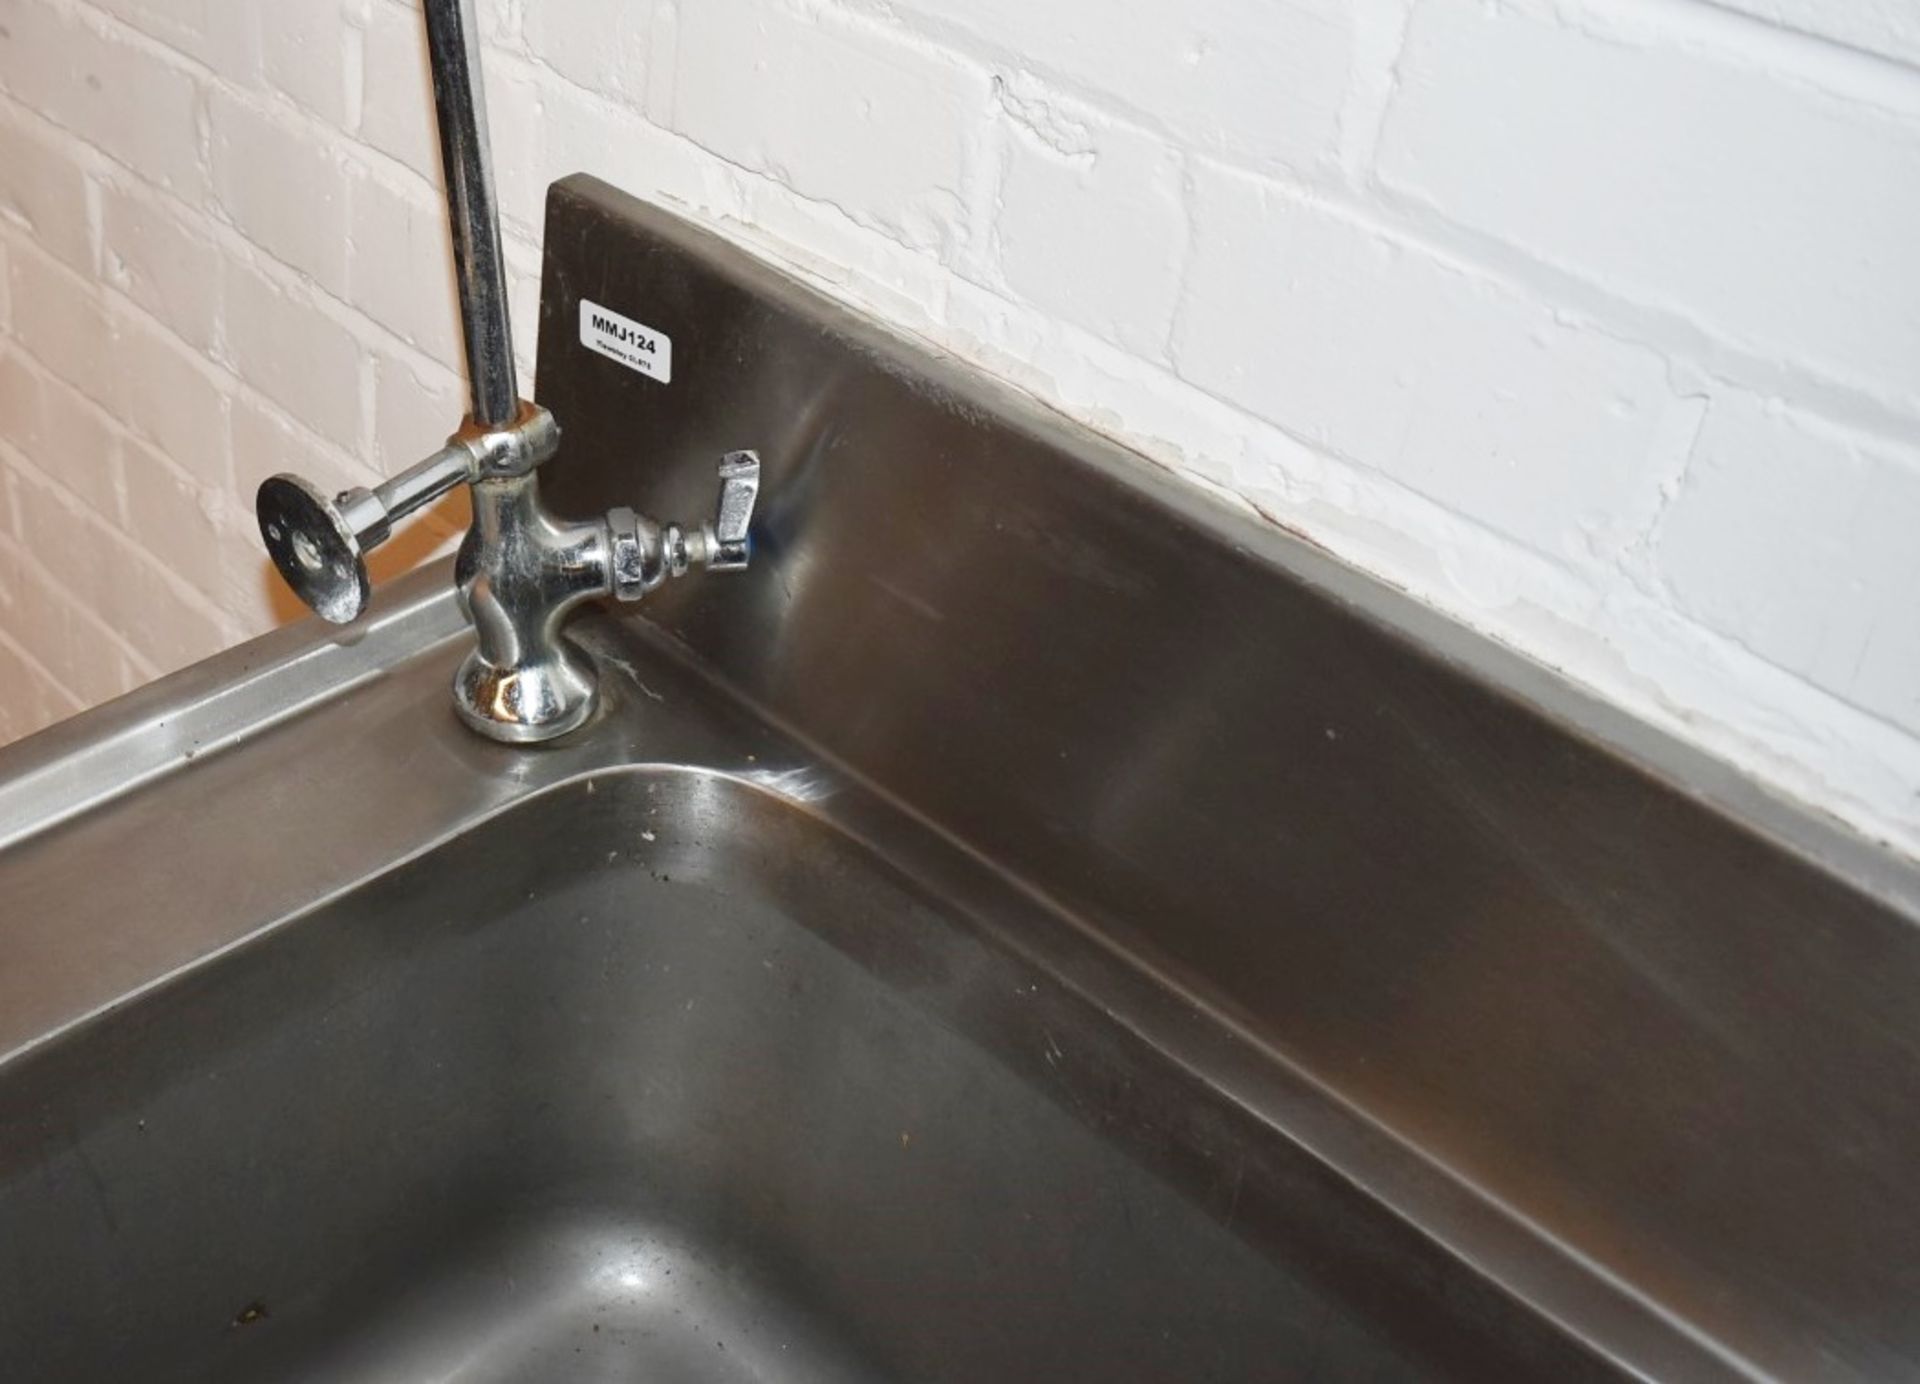 1 x Stainless Steel Sink Unt Featuring Single Wash Bowl, Drainer, Mixer Tap and Spray Hose Rinser - Image 9 of 10